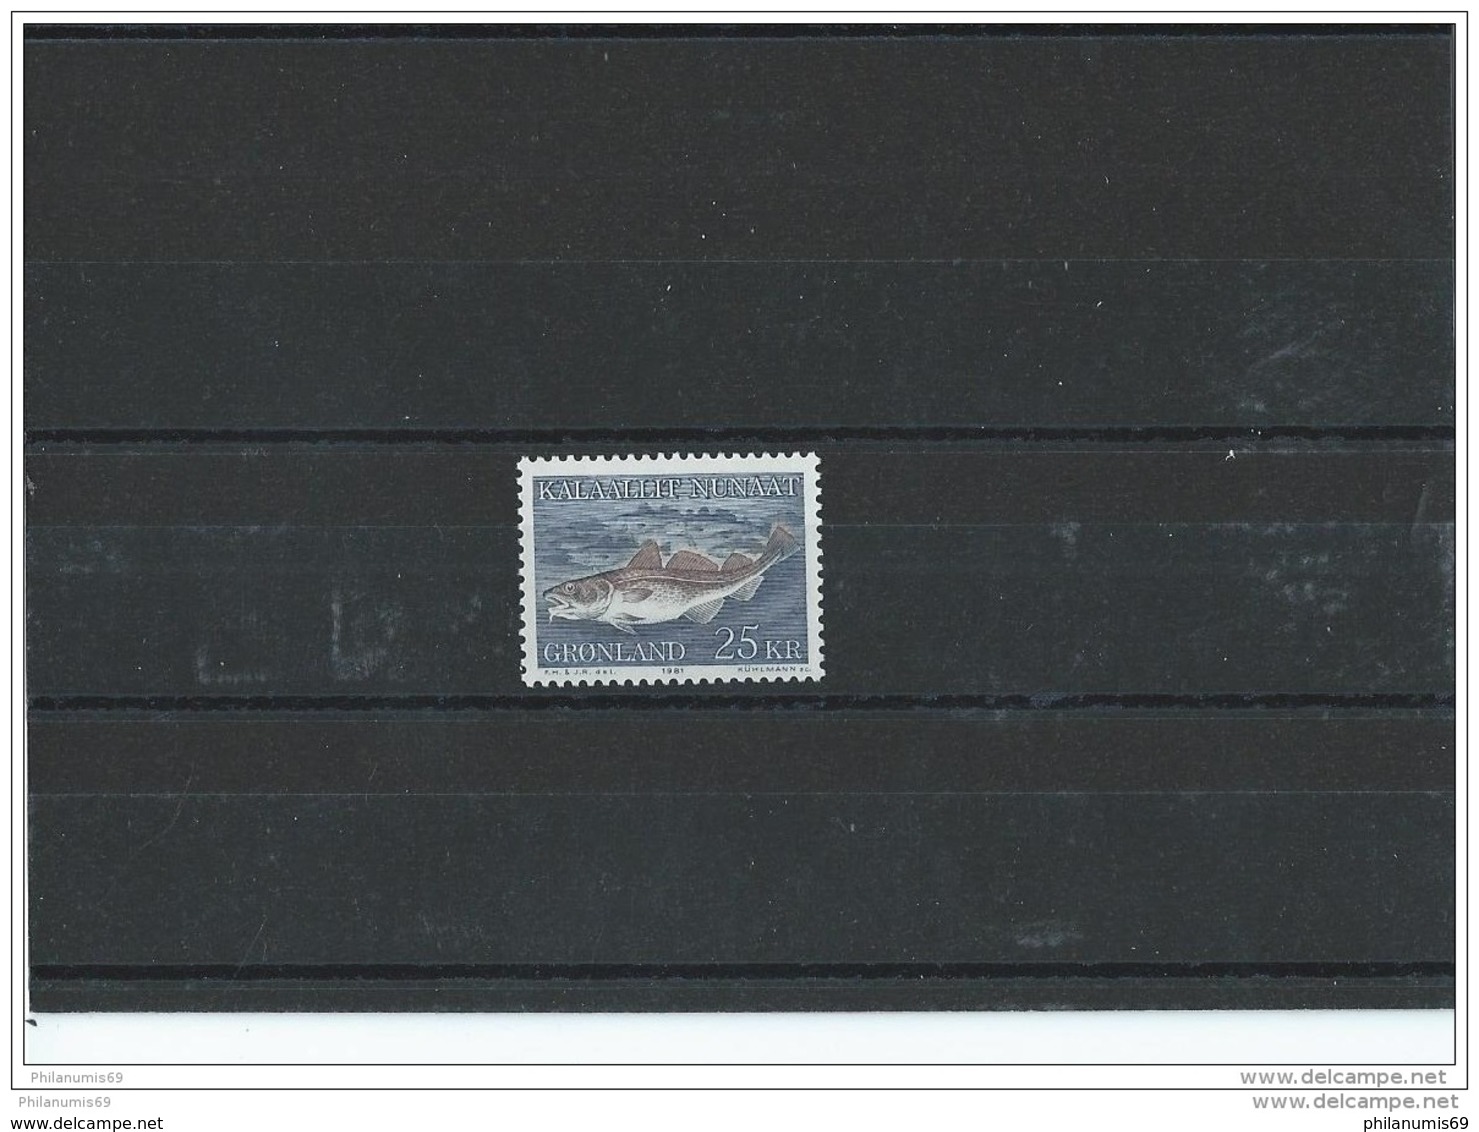 GROENLAND 1981 - YT N° 117 NEUF SANS CHARNIERE ** (MNH) GOMME D'ORIGINE LUXE - Unused Stamps